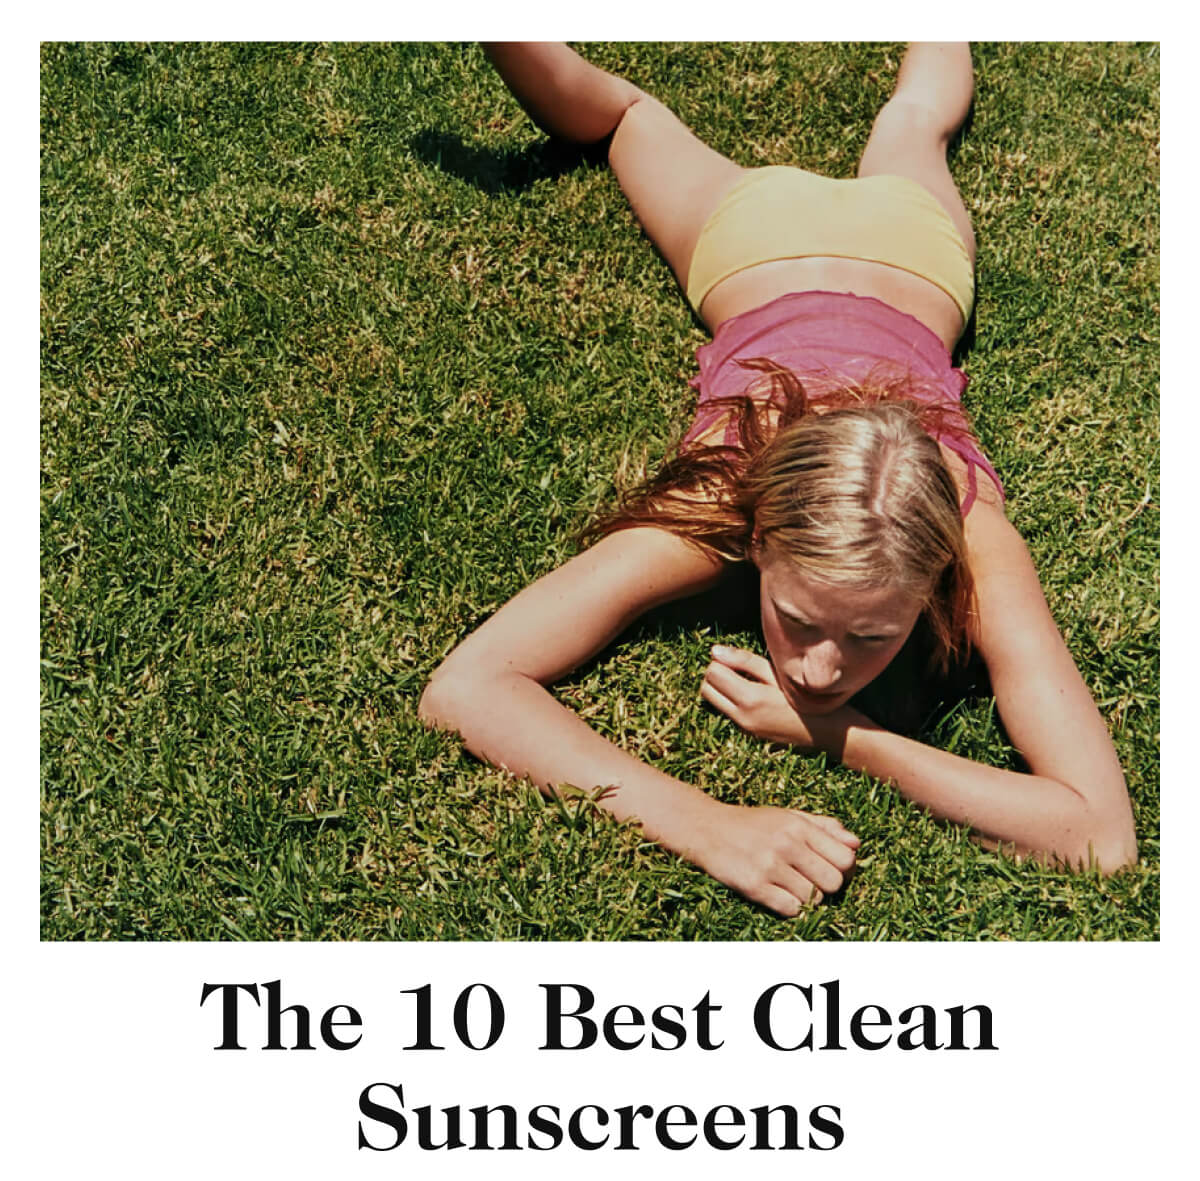 The 8 Best Clean Sunscreens